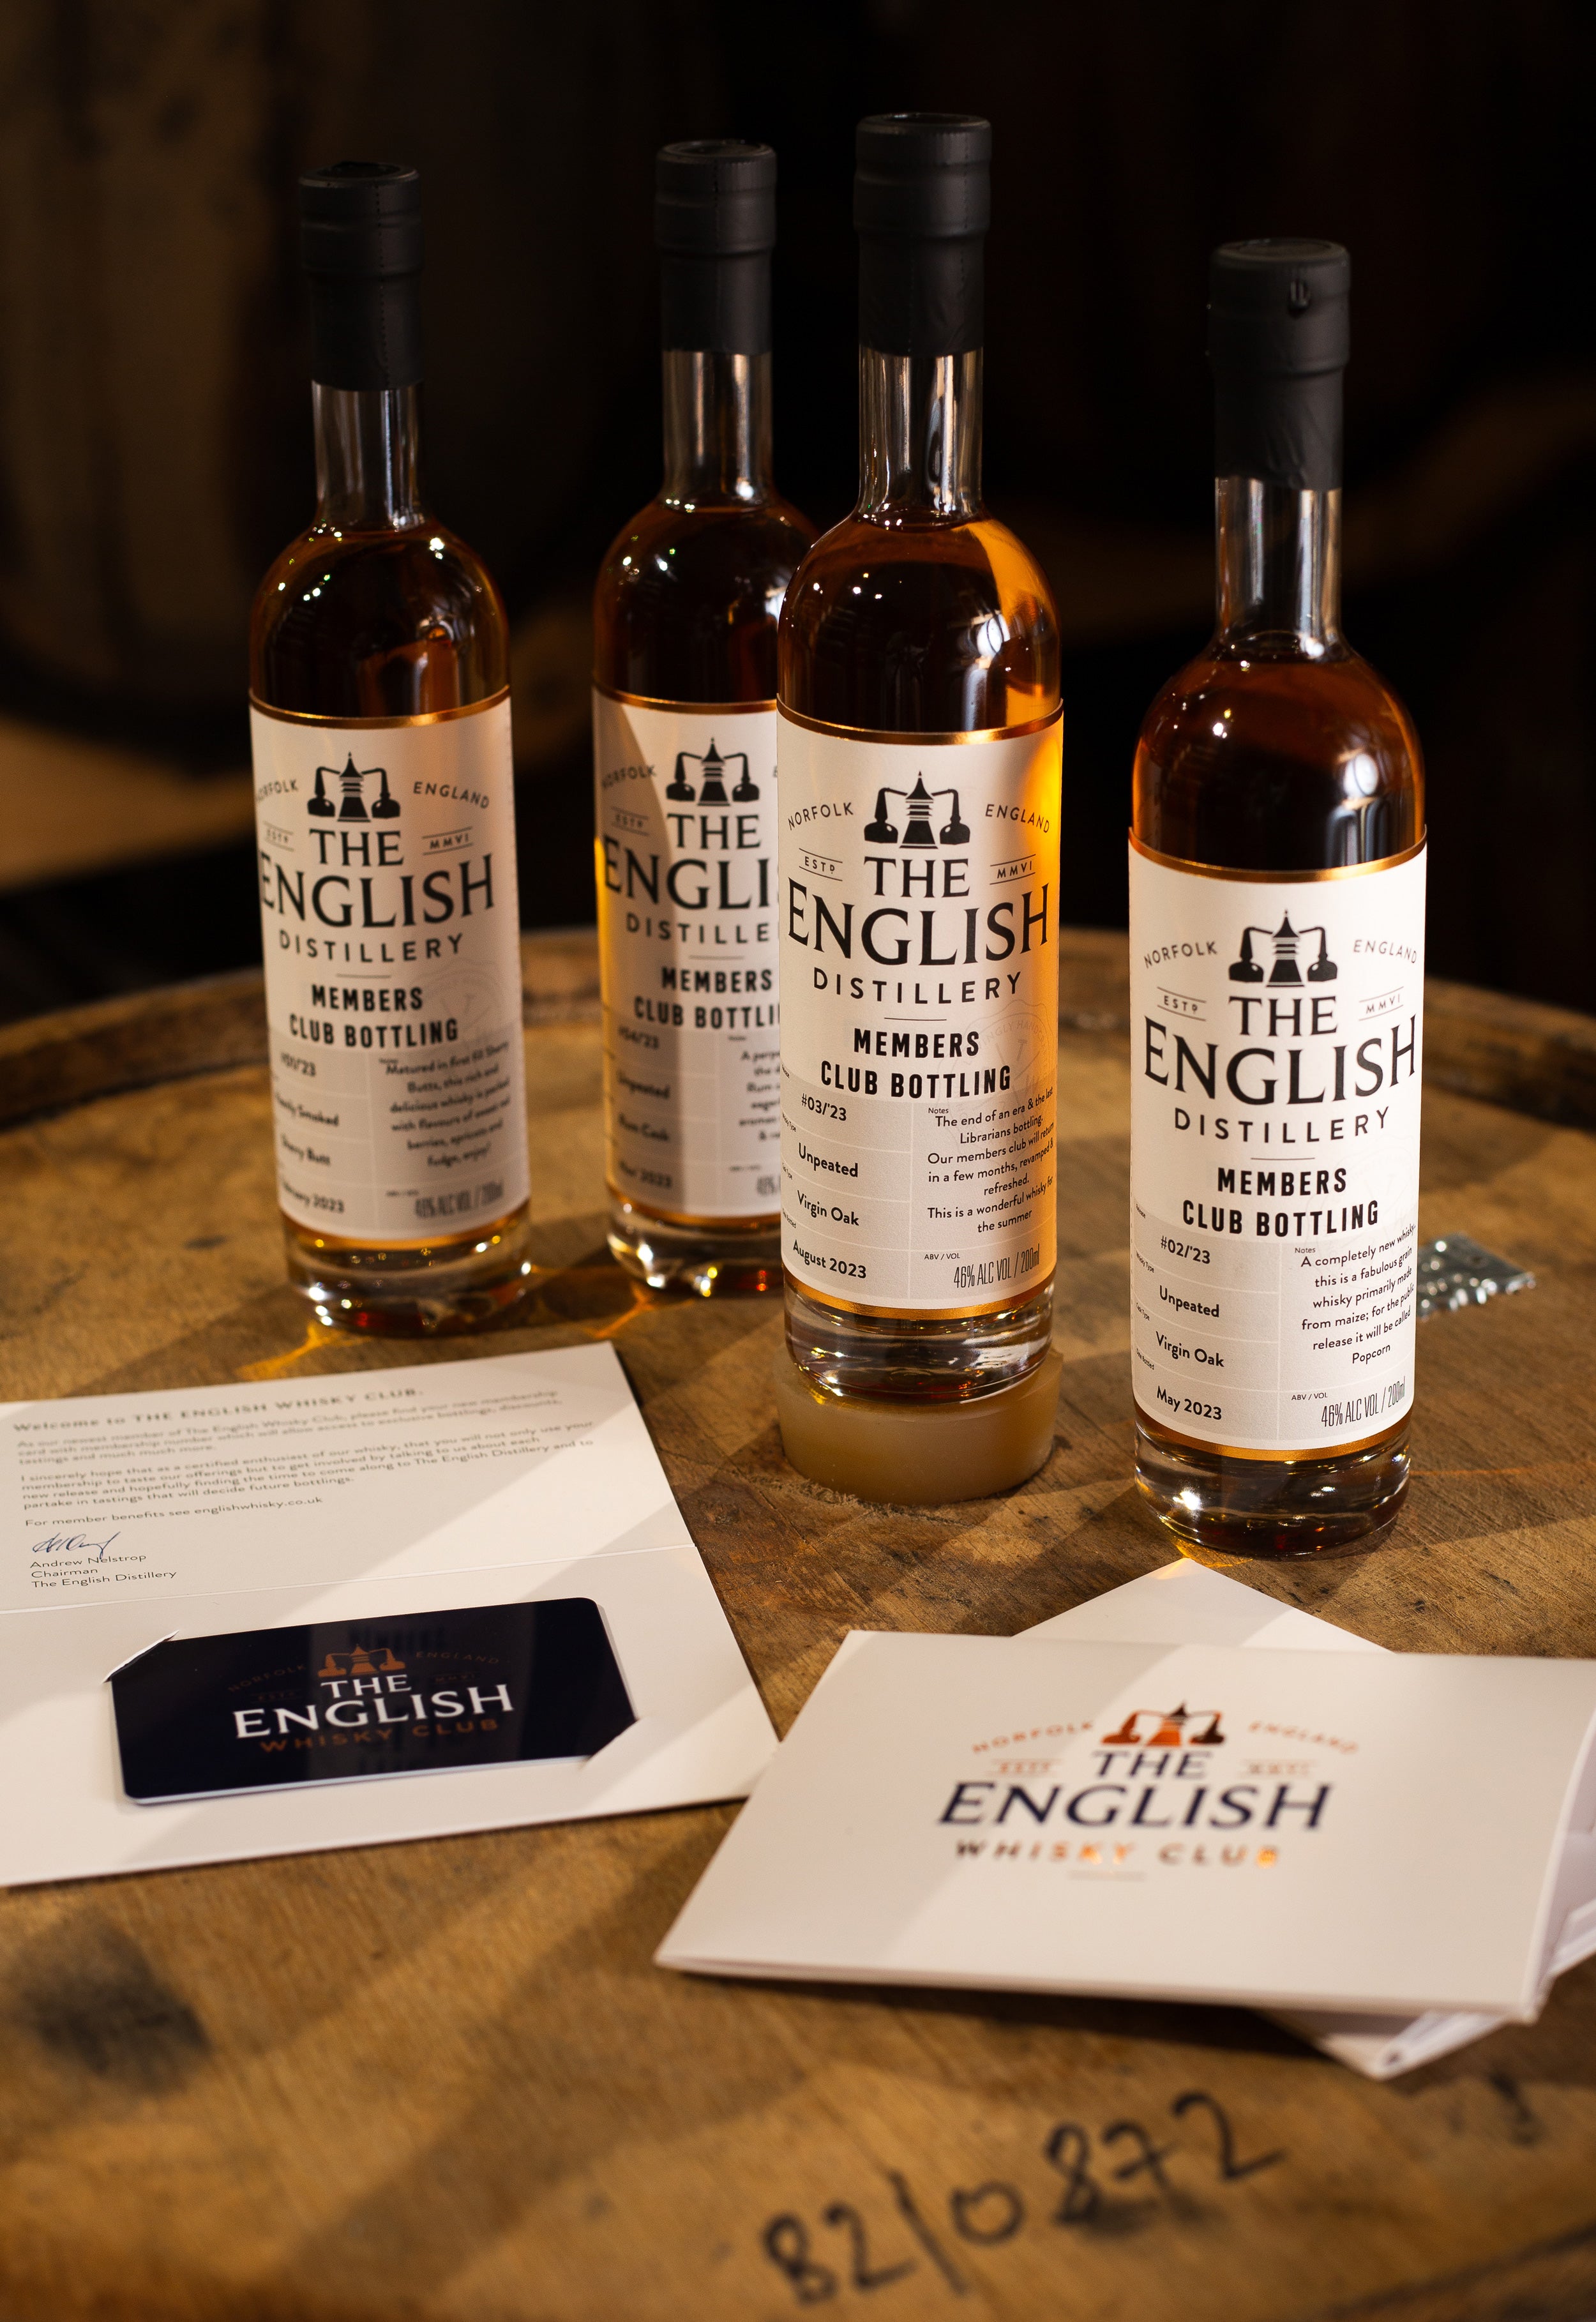 <p>Be the first to sample upcoming releases before anyone else. Every quarter we'll deliver a 20 cl bottle of whisky to your door pre-release.</p><p>Taste, review and discuss in our exclusive online member's forum with one of our whisky experts.</p>